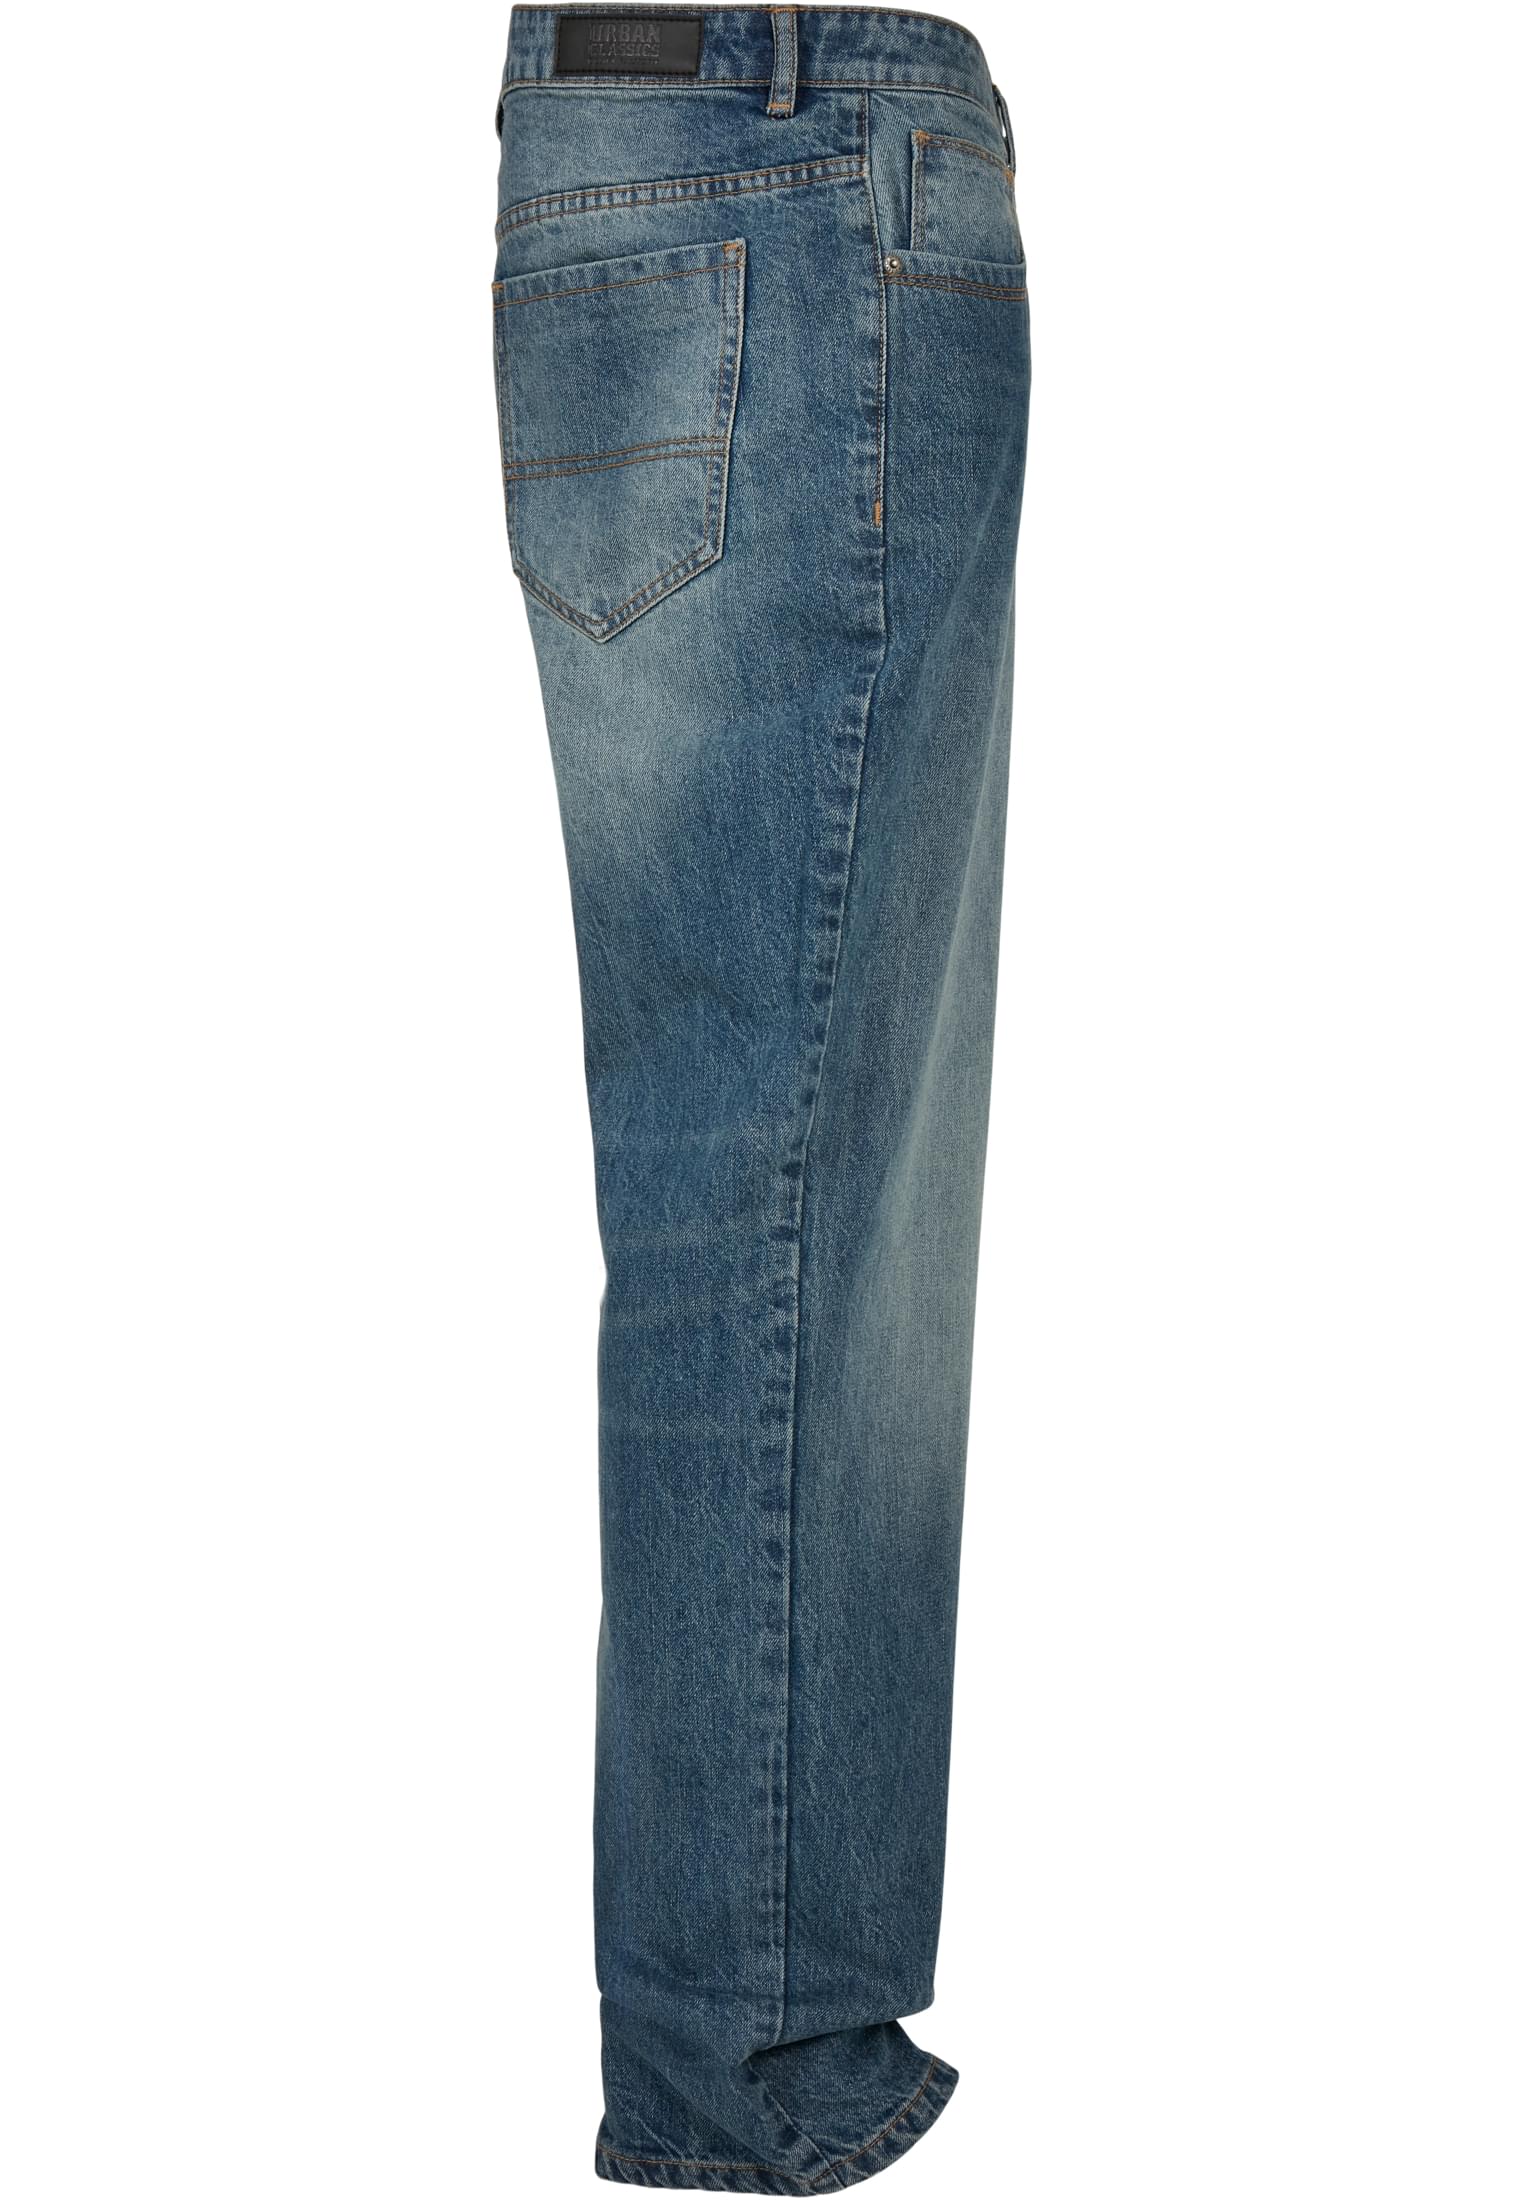 Hosen Loose Fit Jeans in Farbe sand destroyed washed